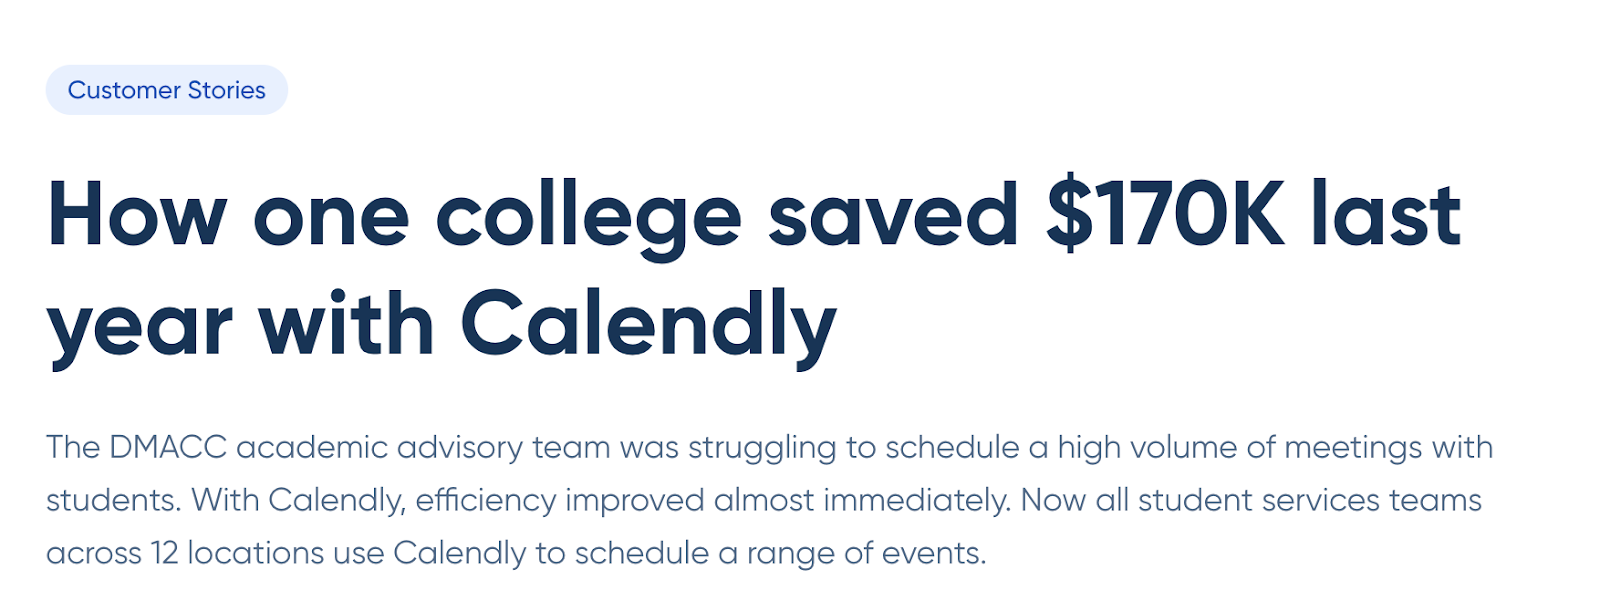 How one college saved $170K last year with Calendly.